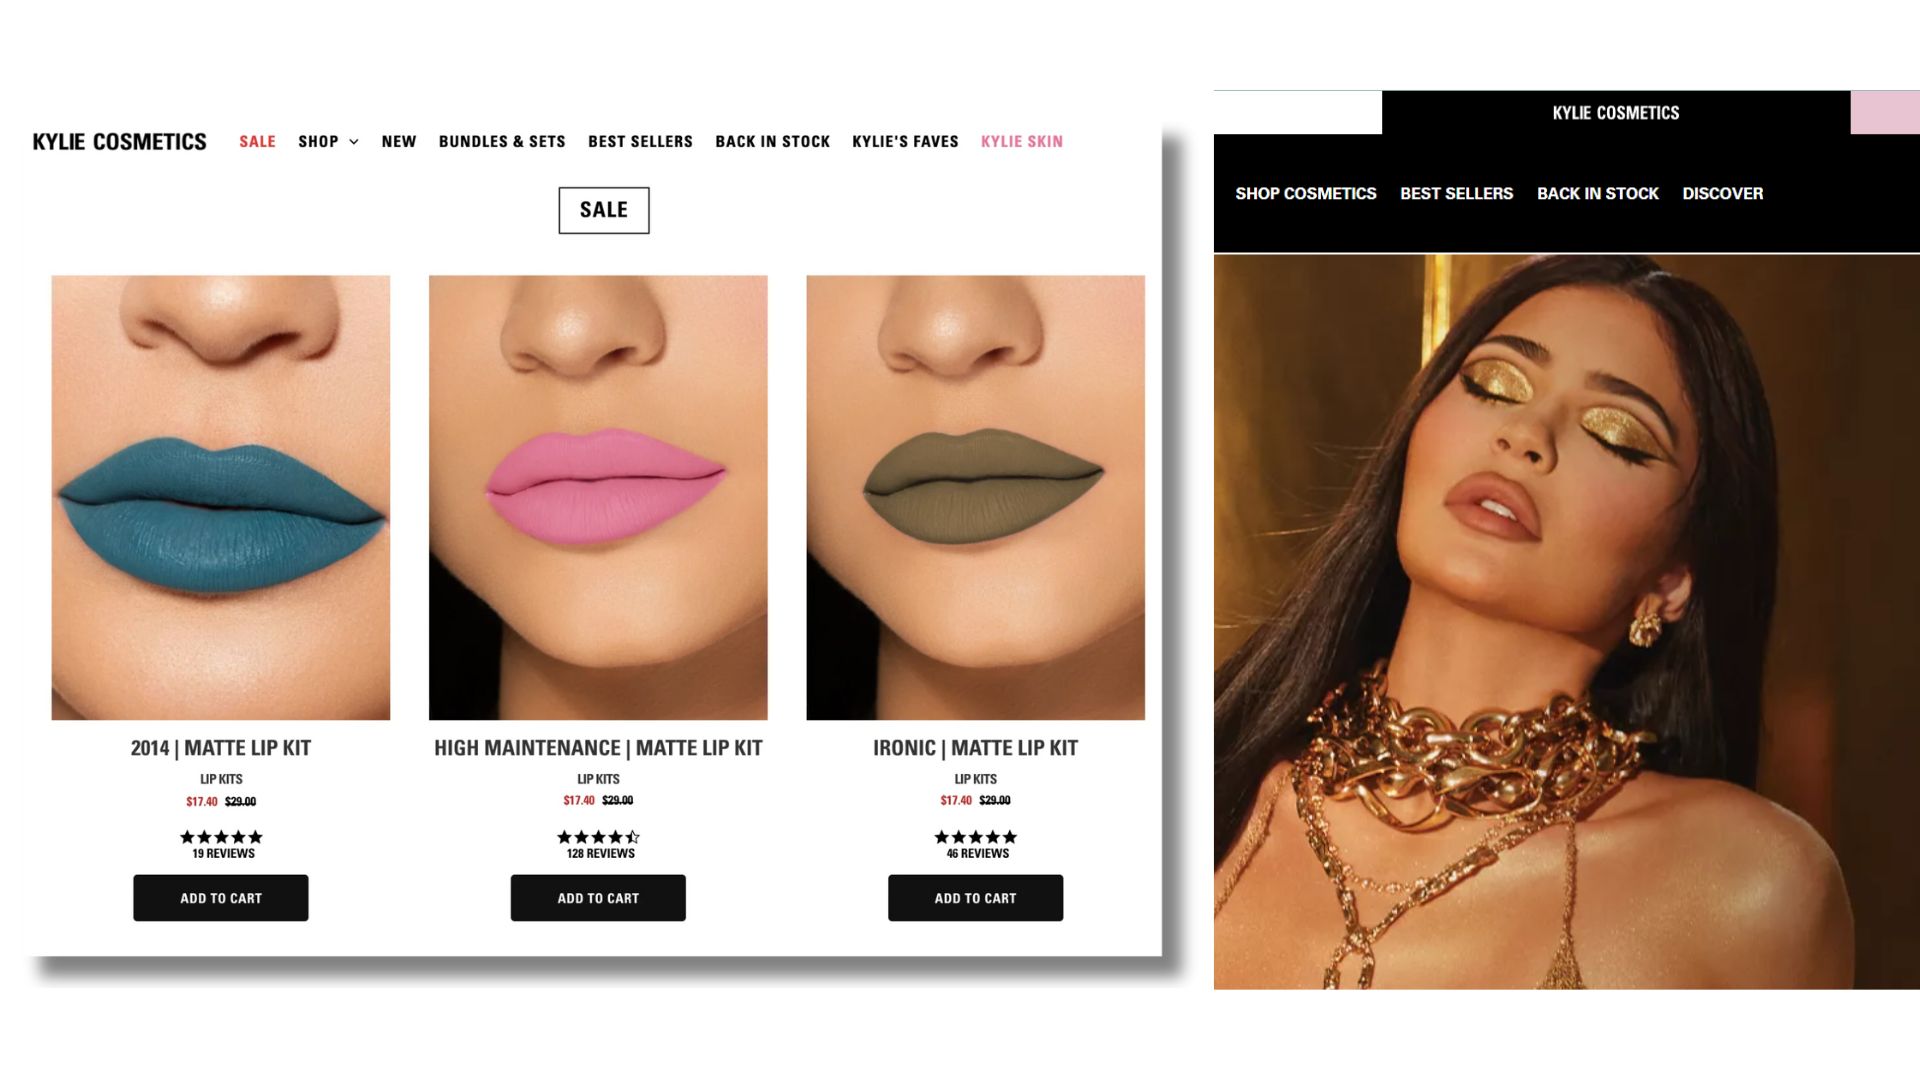 Kylie Cosmetics, by Kylie Jenner, is a prime example of how a Shopify store can flourish through strategic social media integration.